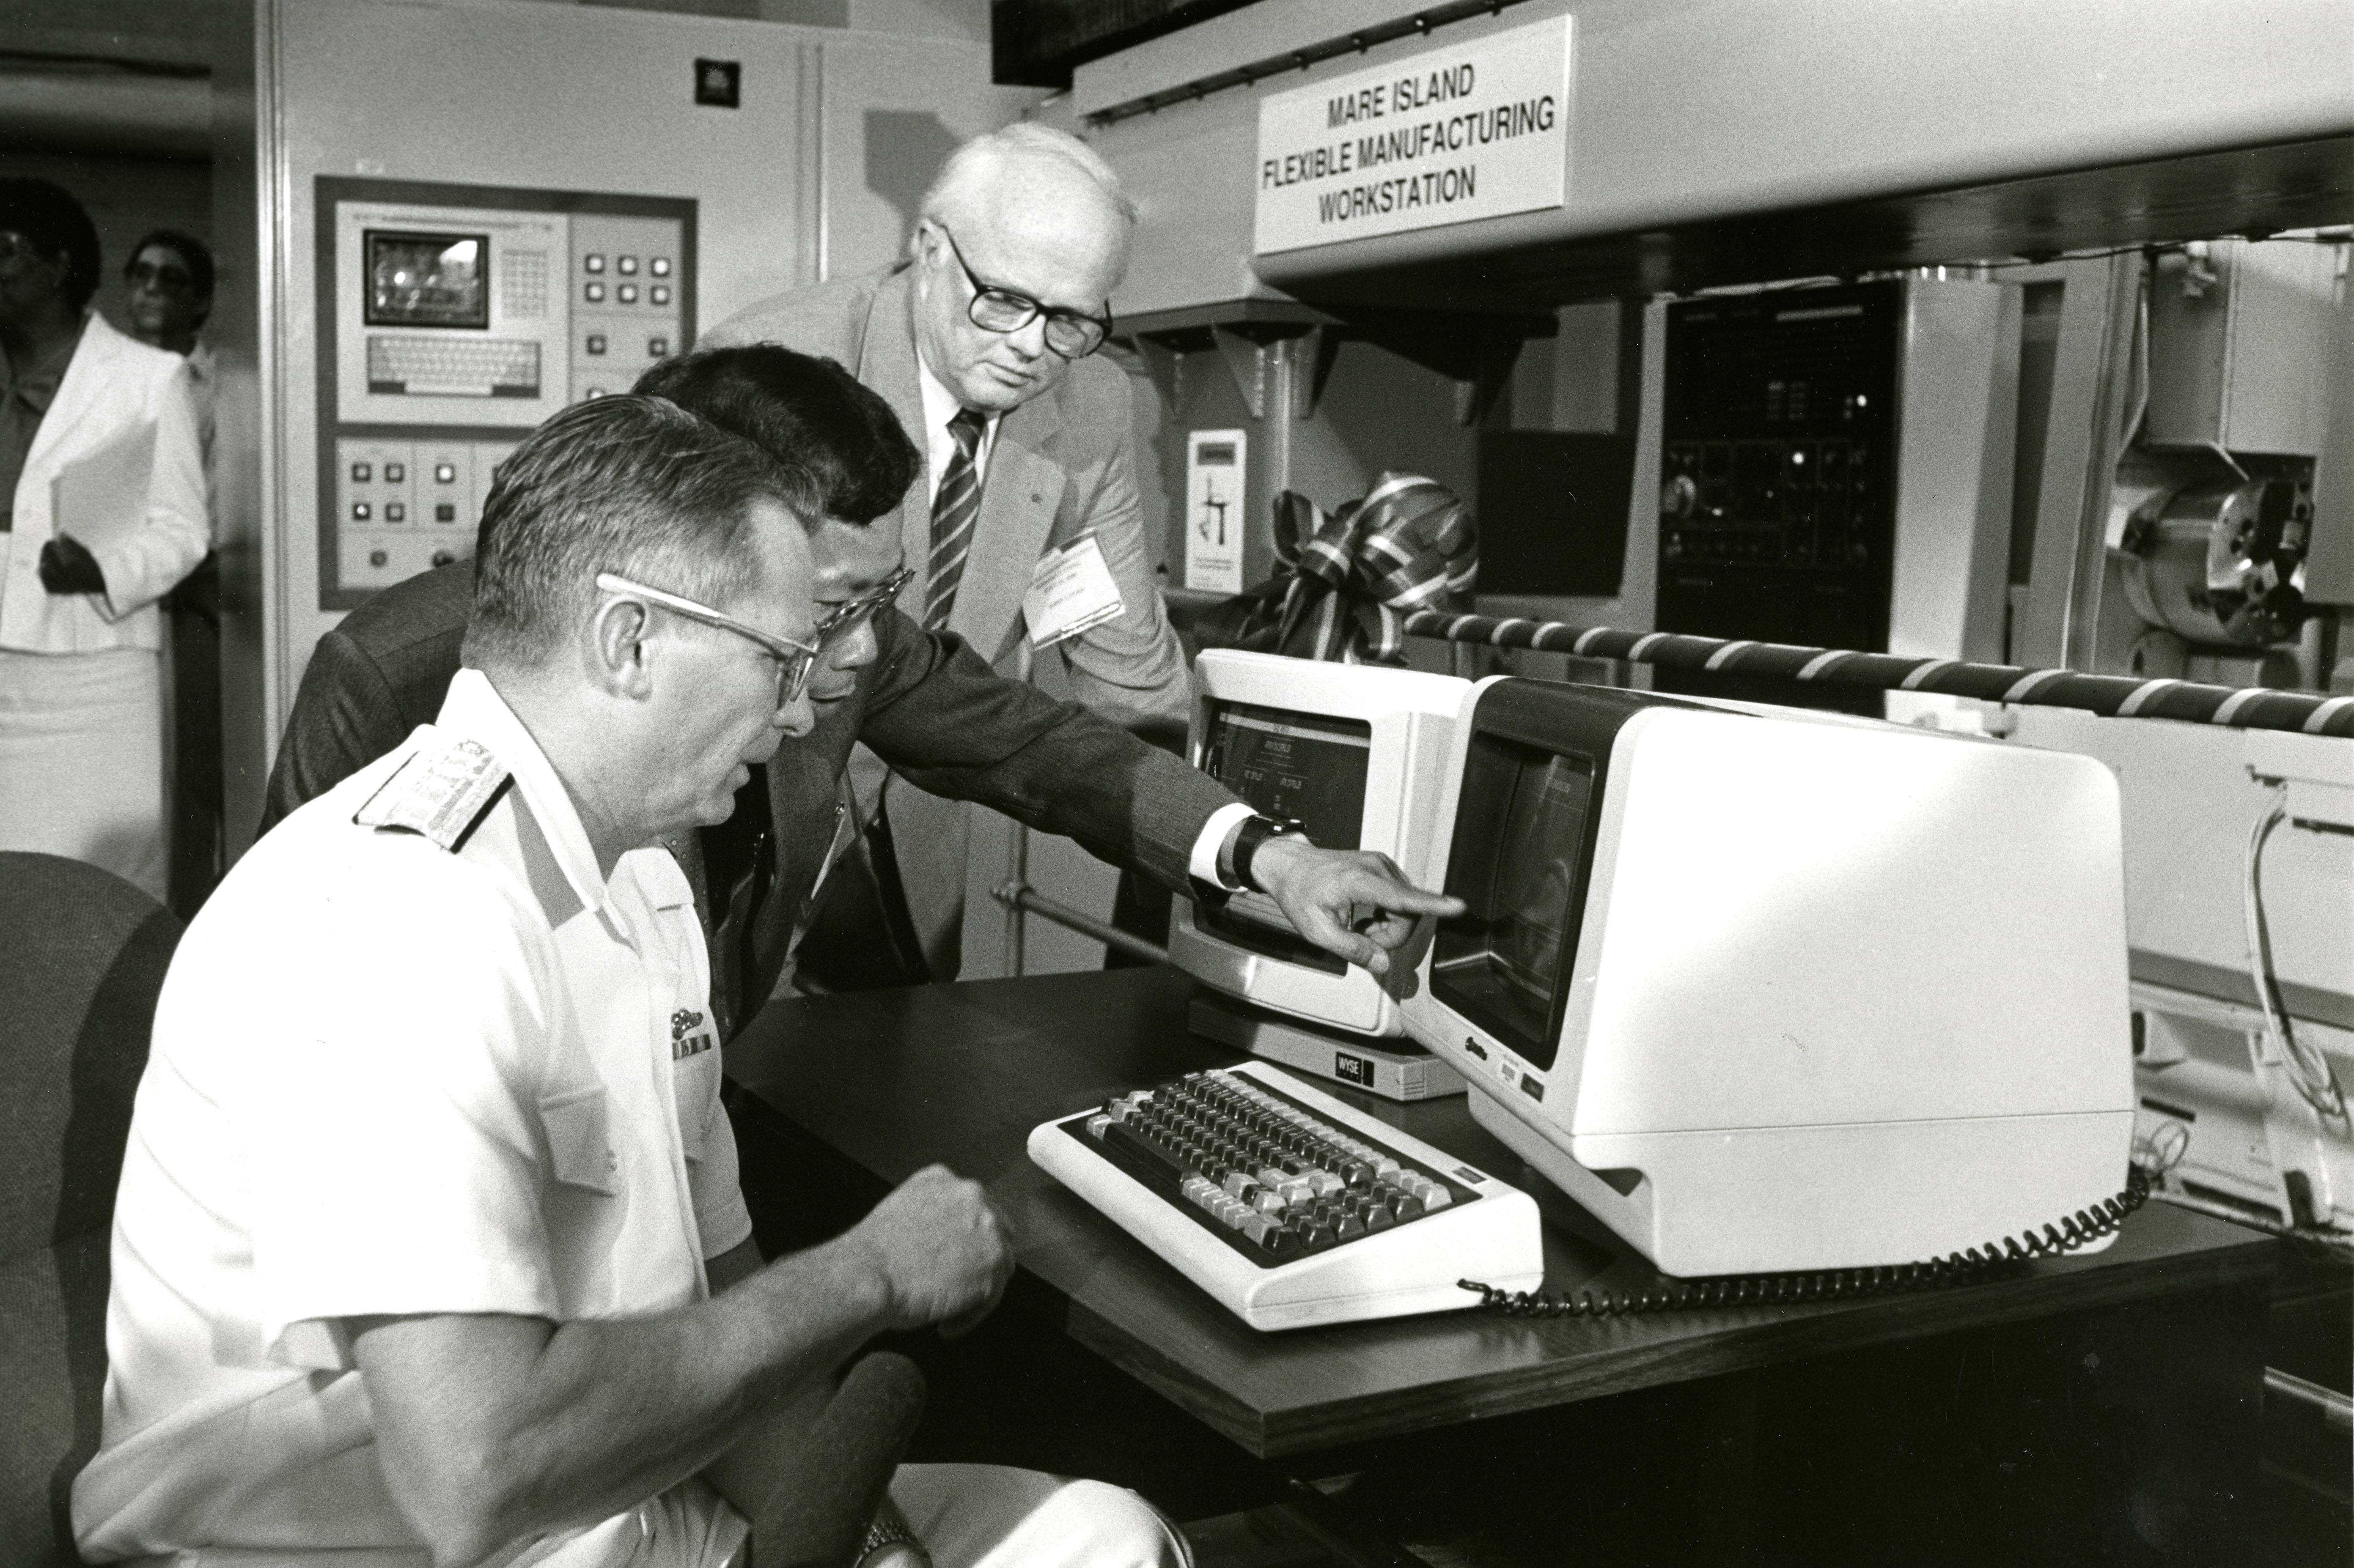 A black and white photograph of a naval officer seated at a computer workstation, another man pointing to the workstation, and a third man standing nearby.